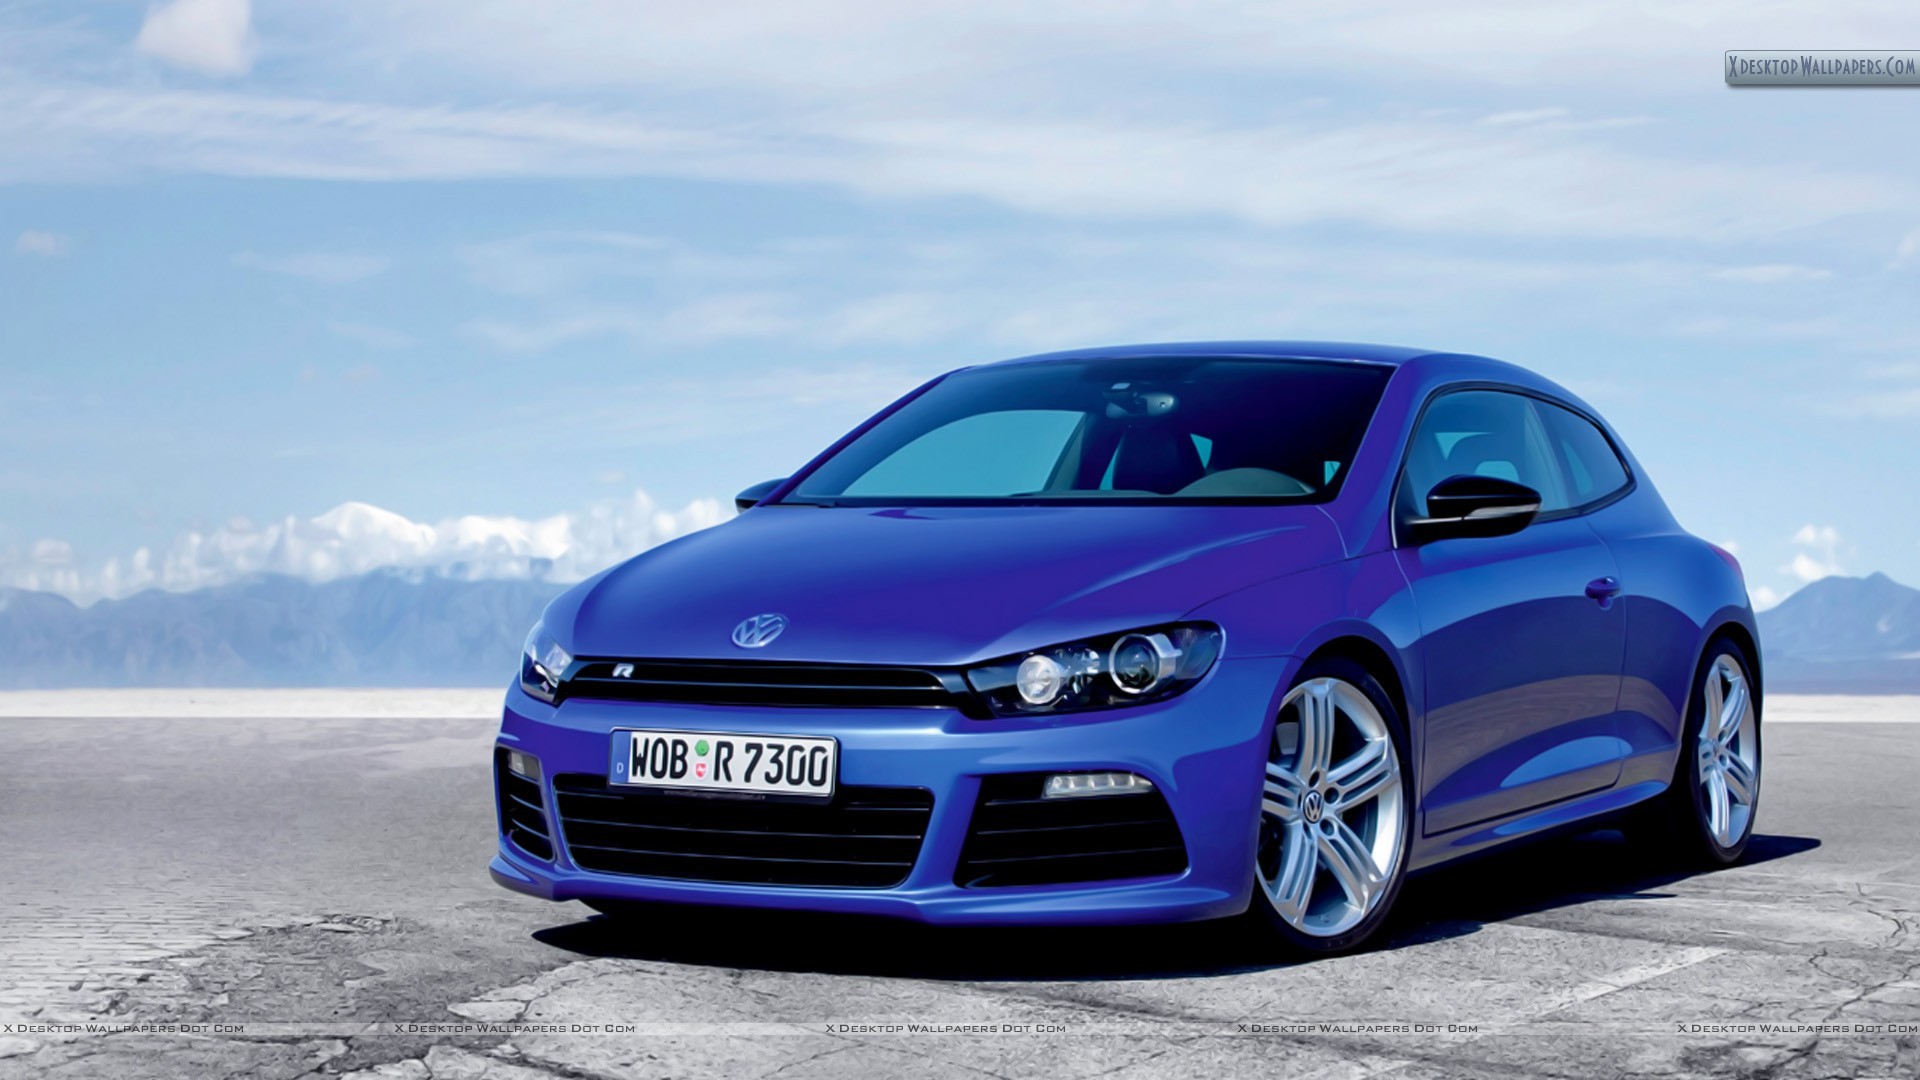 1920x1080 You are viewing wallpaper titled "Volkswagen Scirocco R Blue Car ...